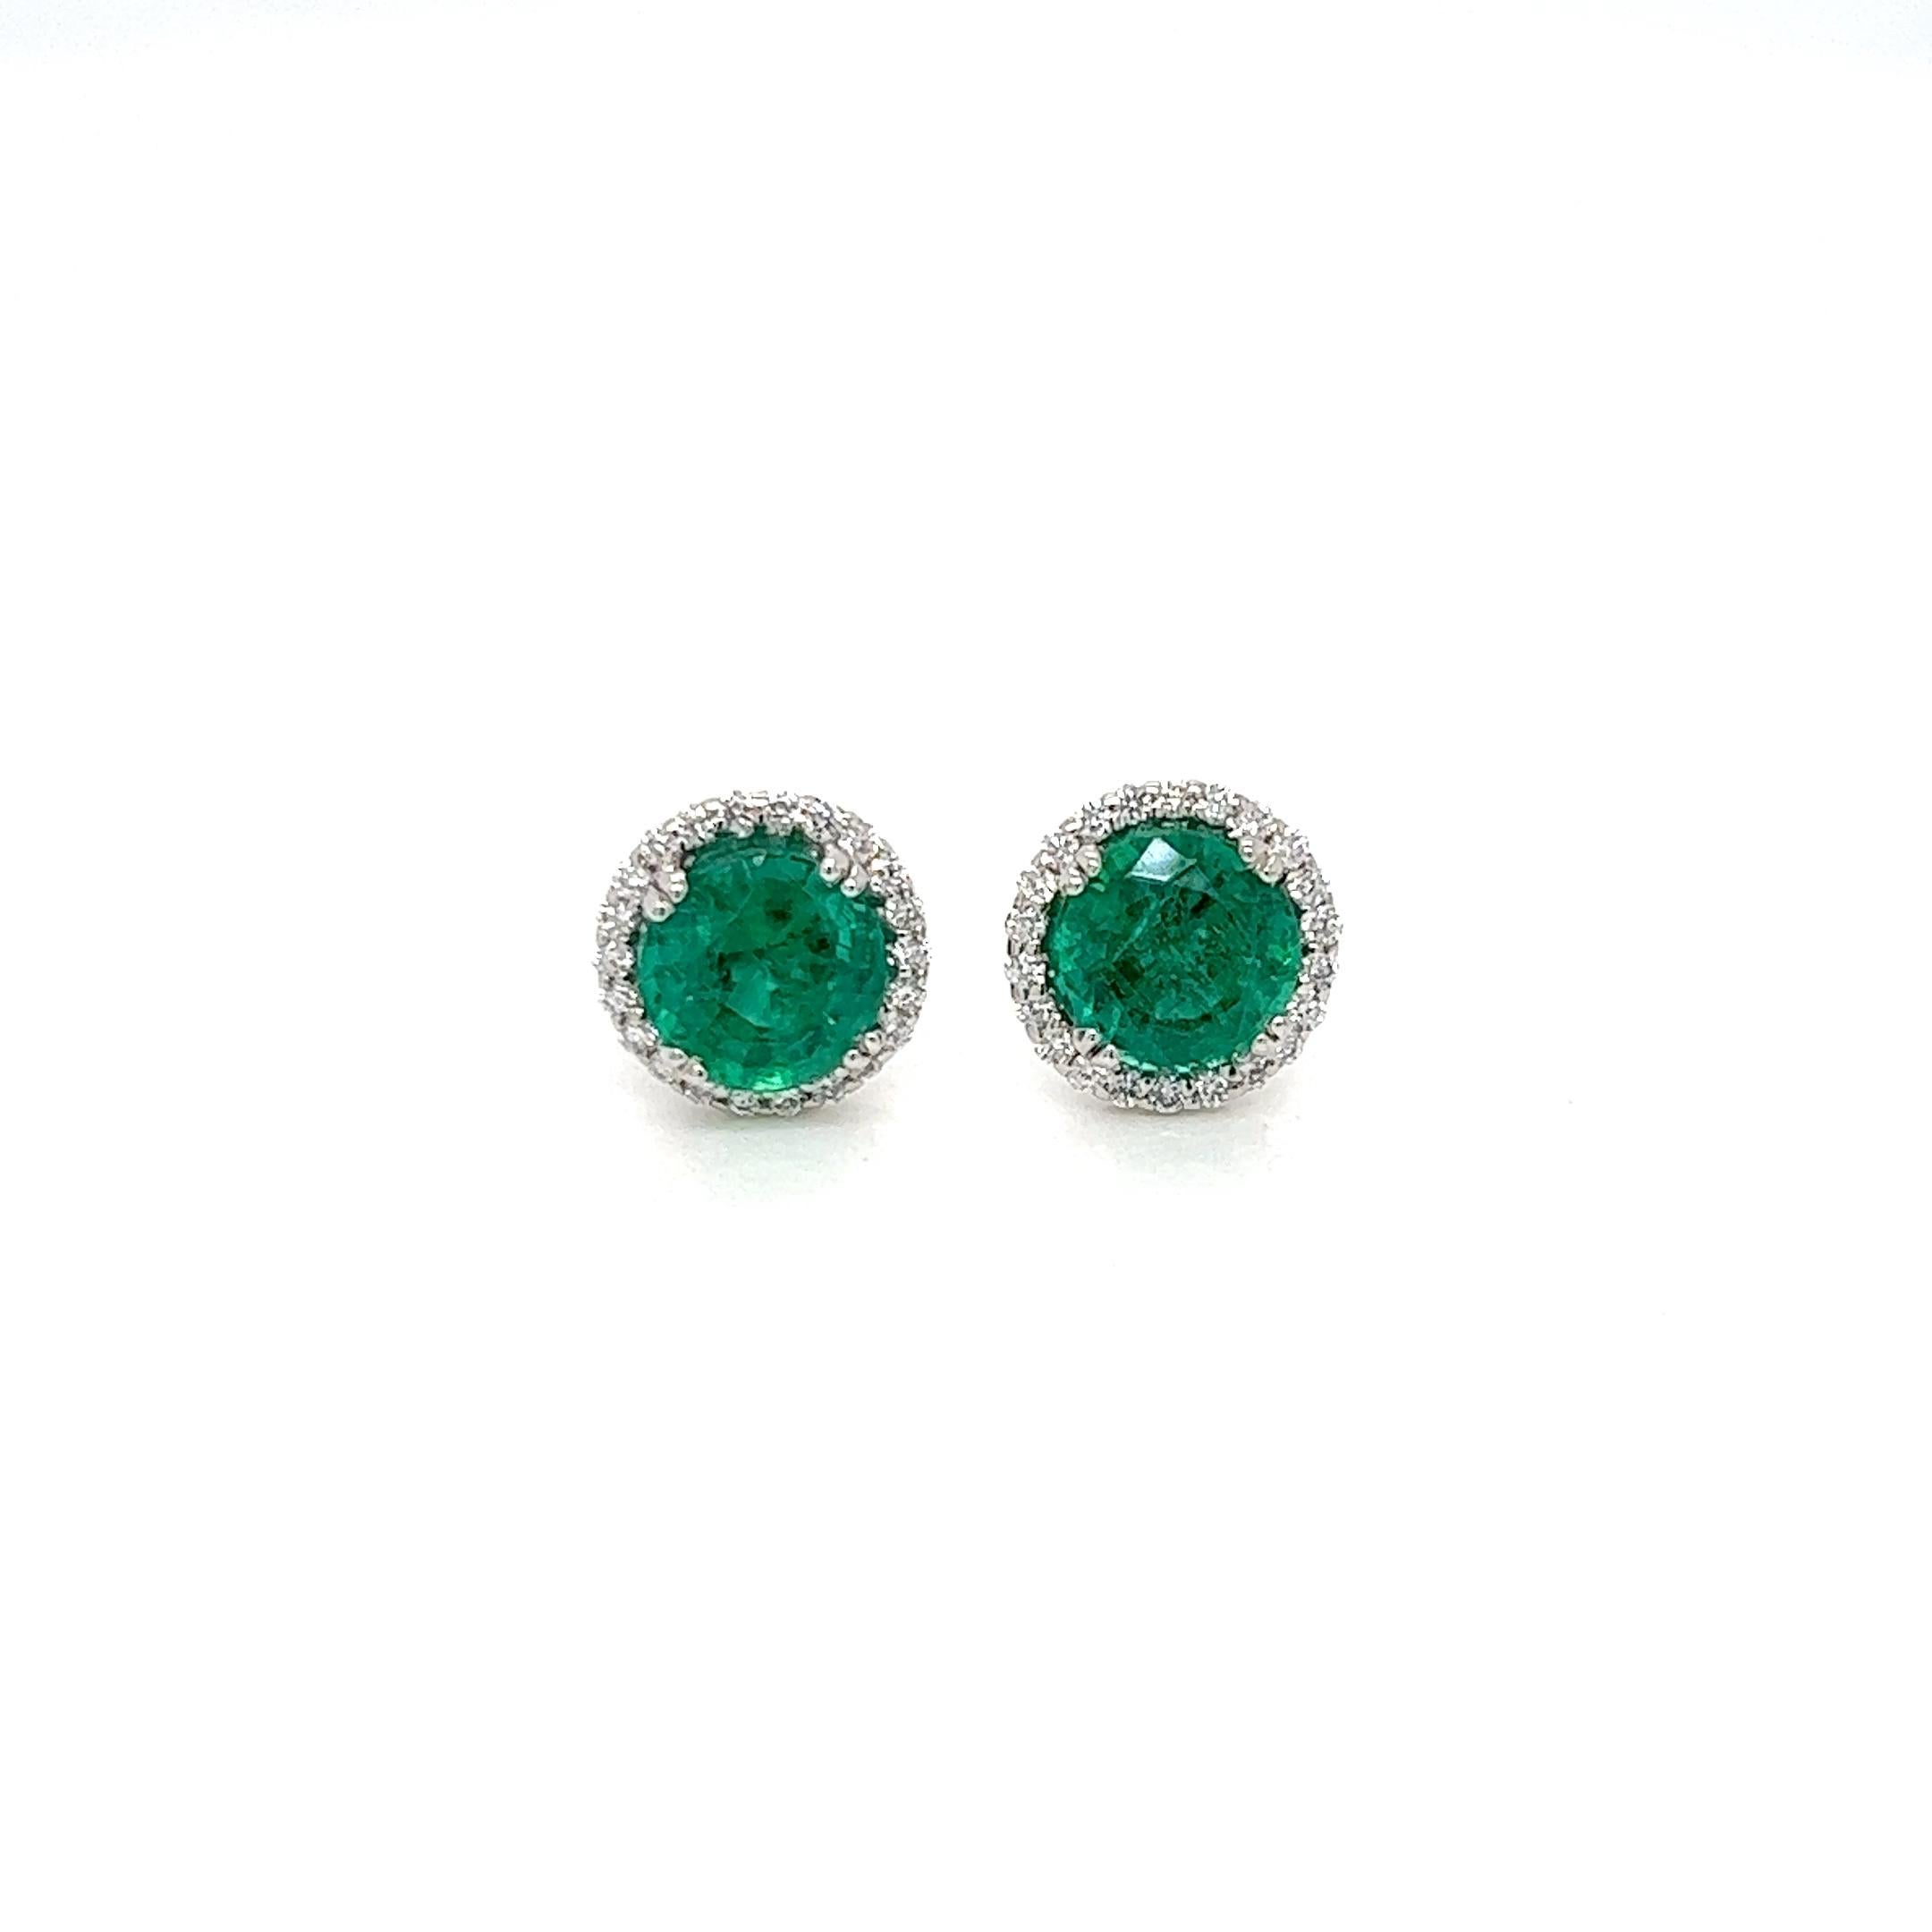 1.67 Carats Emerald and Diamond Stud Earrings in 18k White Gold In New Condition For Sale In New York, NY